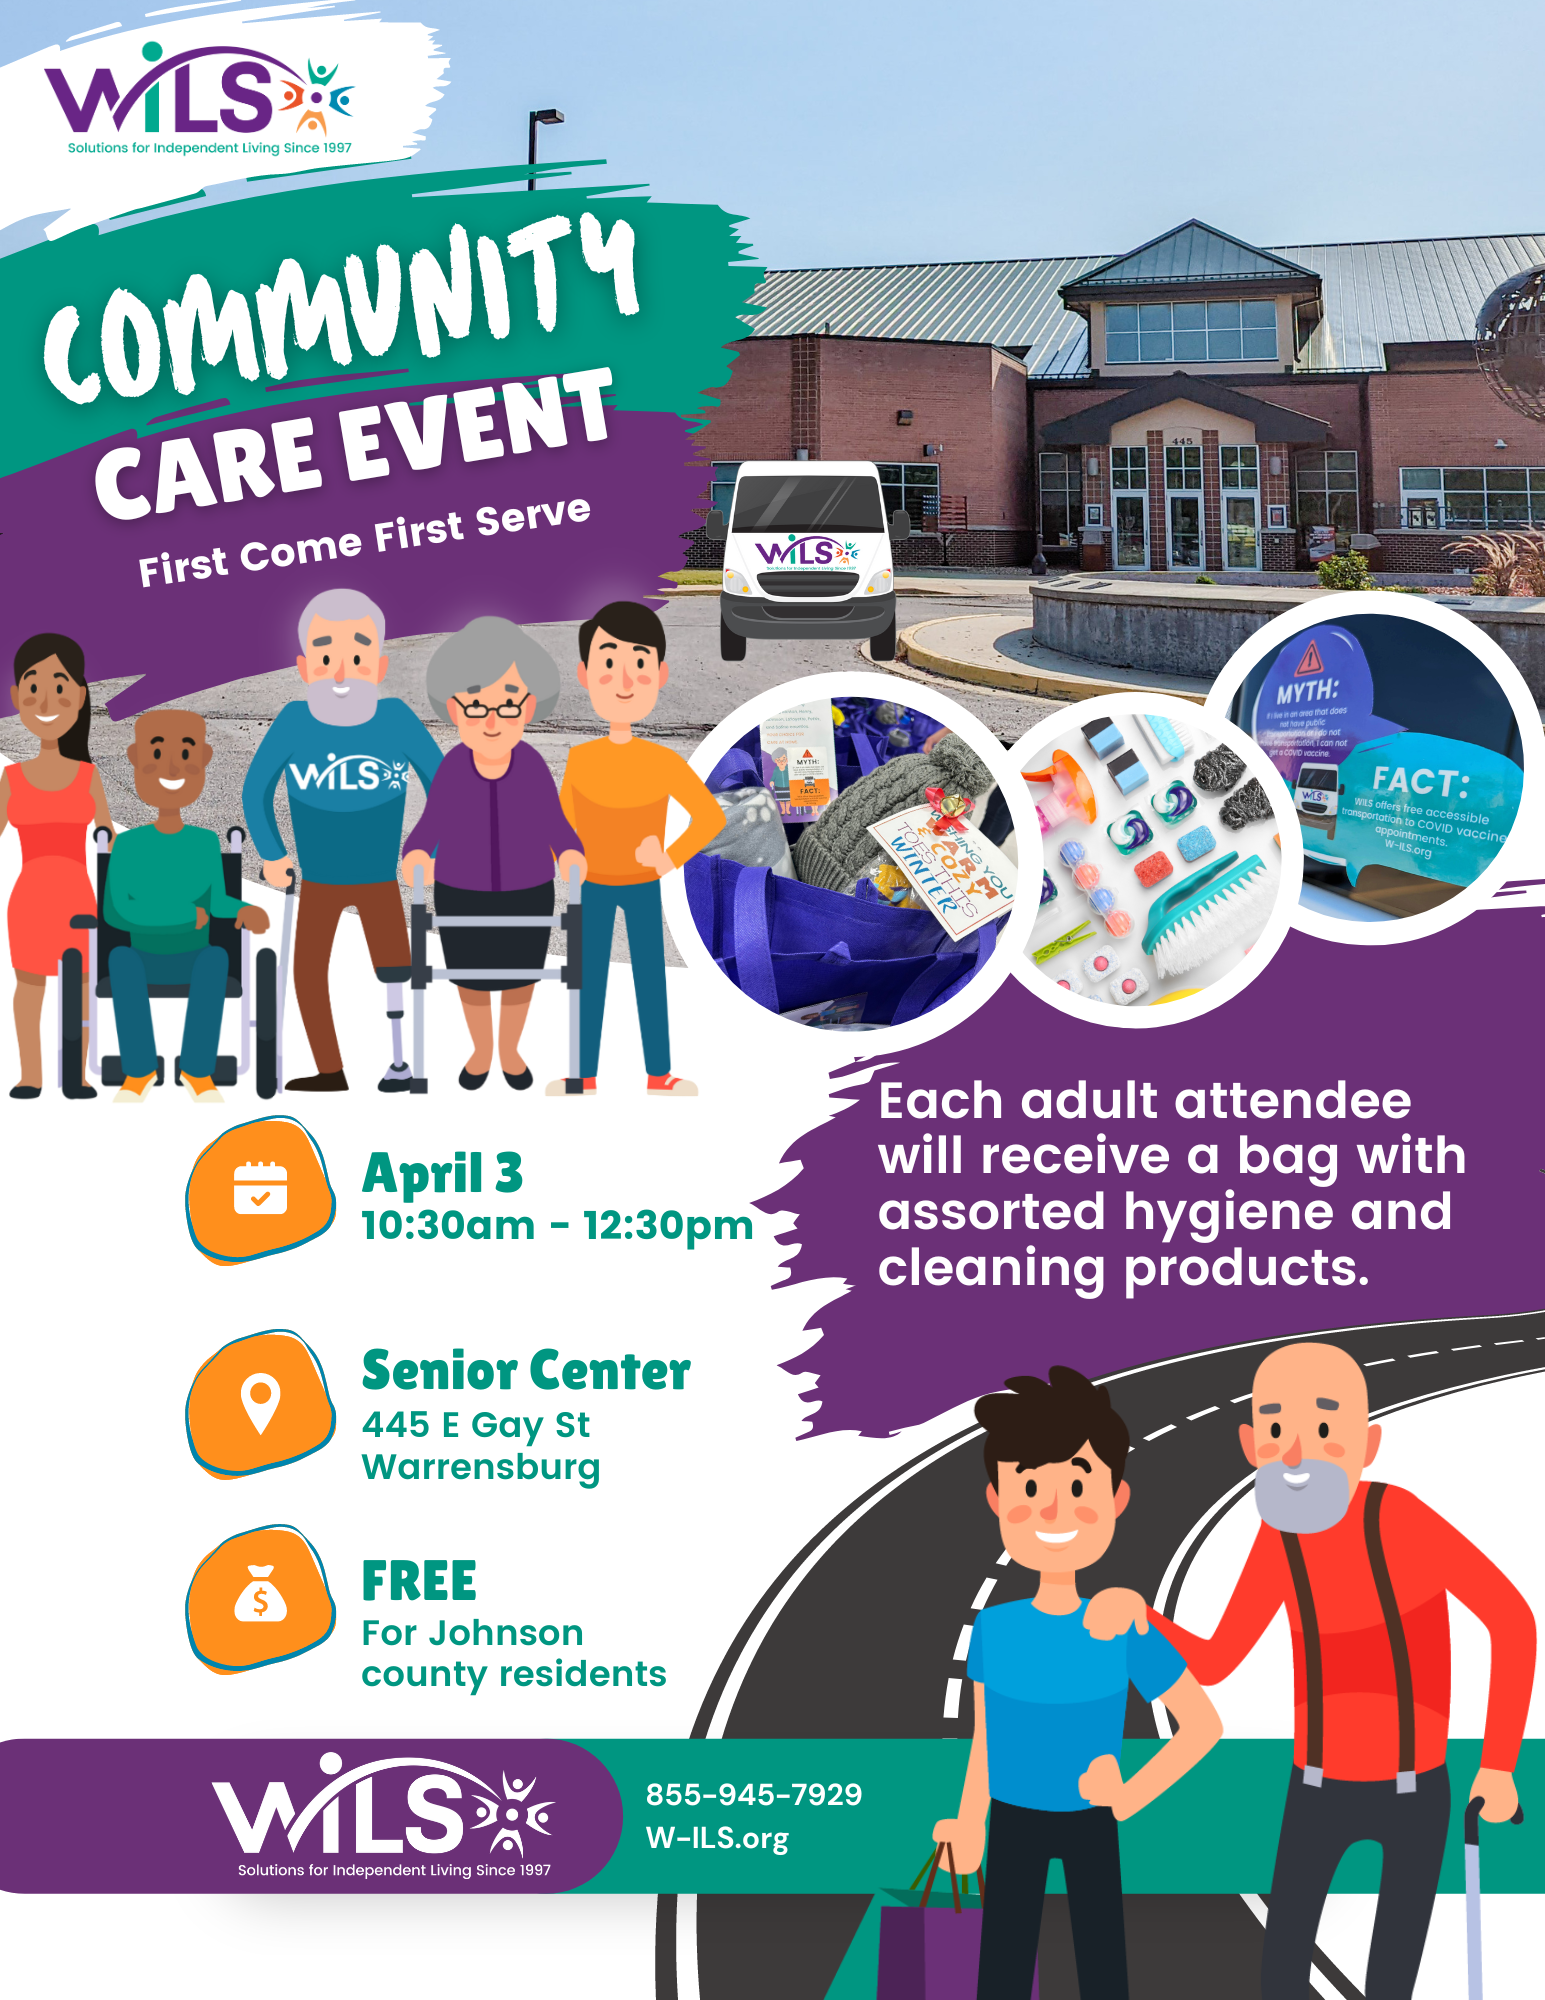 Community Care Event April 3 at the Senior Center FREE 10:30am - 12:30pm. 445 E. Gay St. Warrensburg, MO, MO For Johnson county residents. First come, first serve.